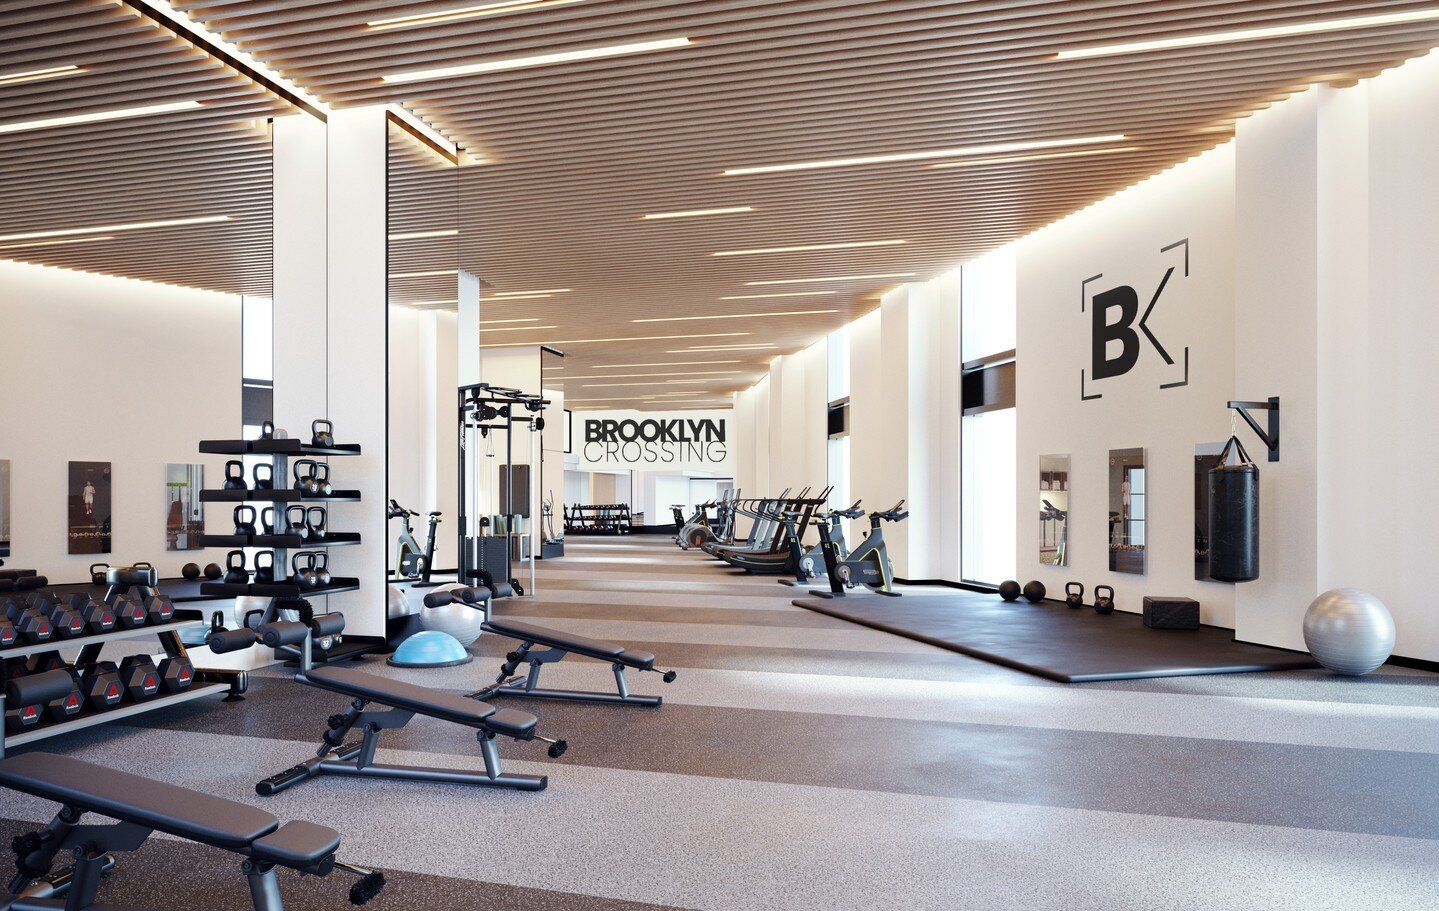 Show us your strength. @BklynCrossing has 5,200 square feet of space in its fitness center for you to work out in style. Tap the link in bio to see what this gym offers and all of the other amenities at Prospect Heights' most exciting address.

📷: @